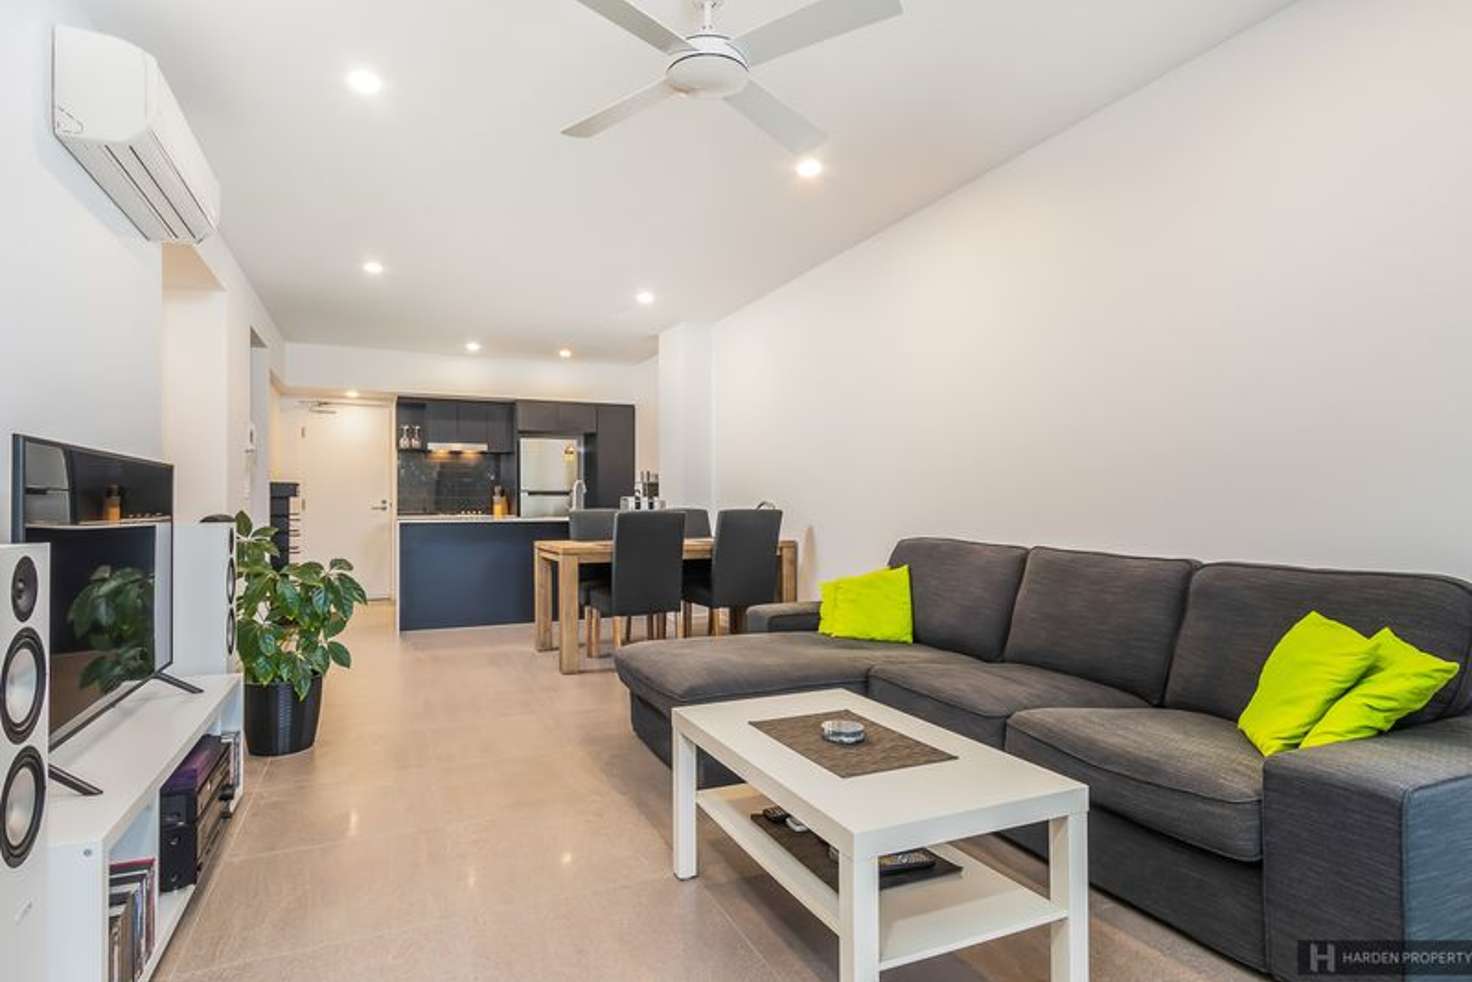 Main view of Homely apartment listing, 22/11 Rolleston St (AKA 83 Dawson Pde), Keperra QLD 4054